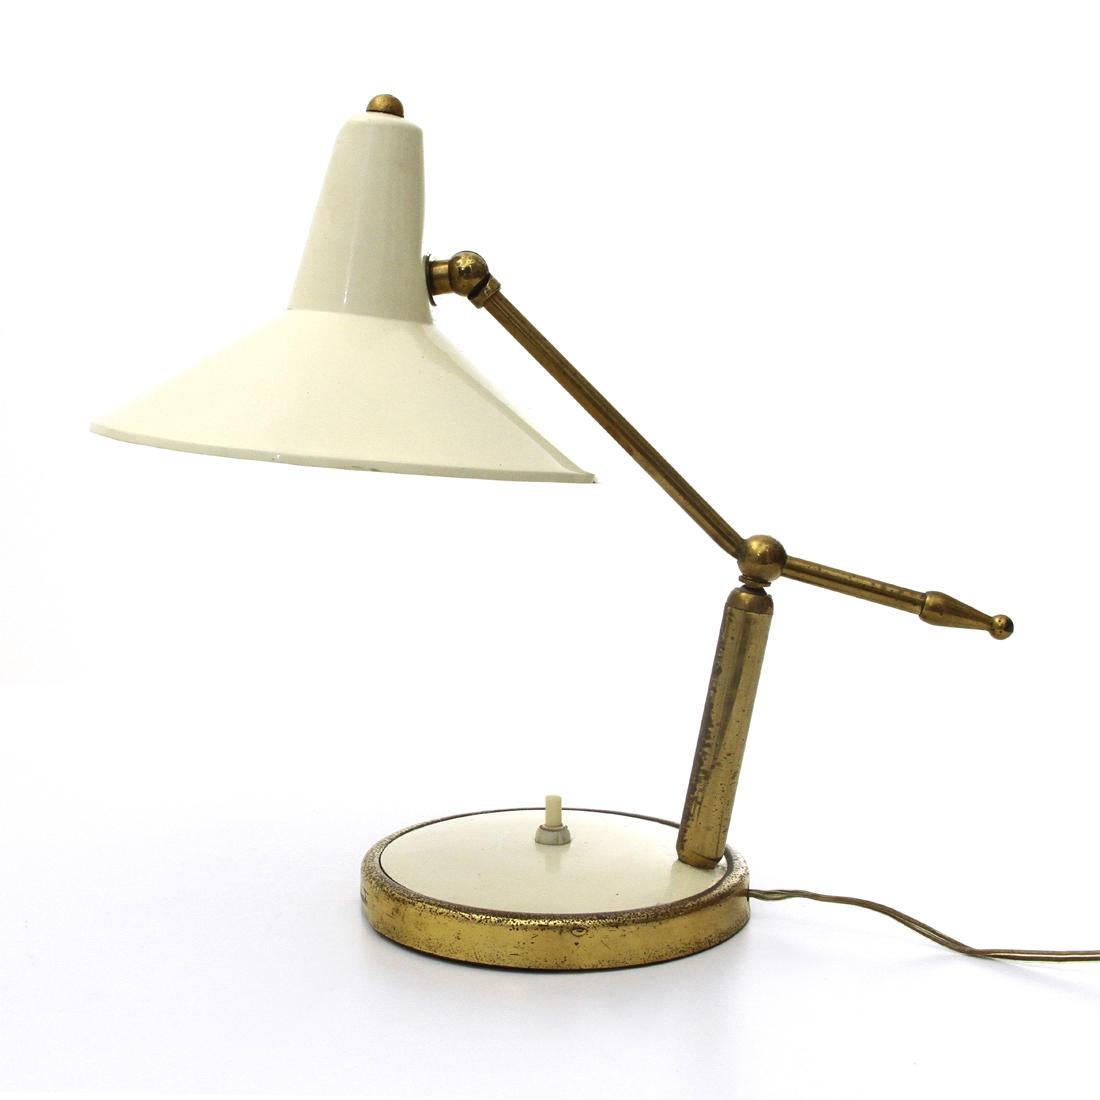 Table lamp of Italian manufacture produced in the 50s.
Circular base in brass and white painted metal.
Adjustable brass arm and white painted aluminum diffuser.
Power button on the base.
Good general conditions, some signs due to normal use over